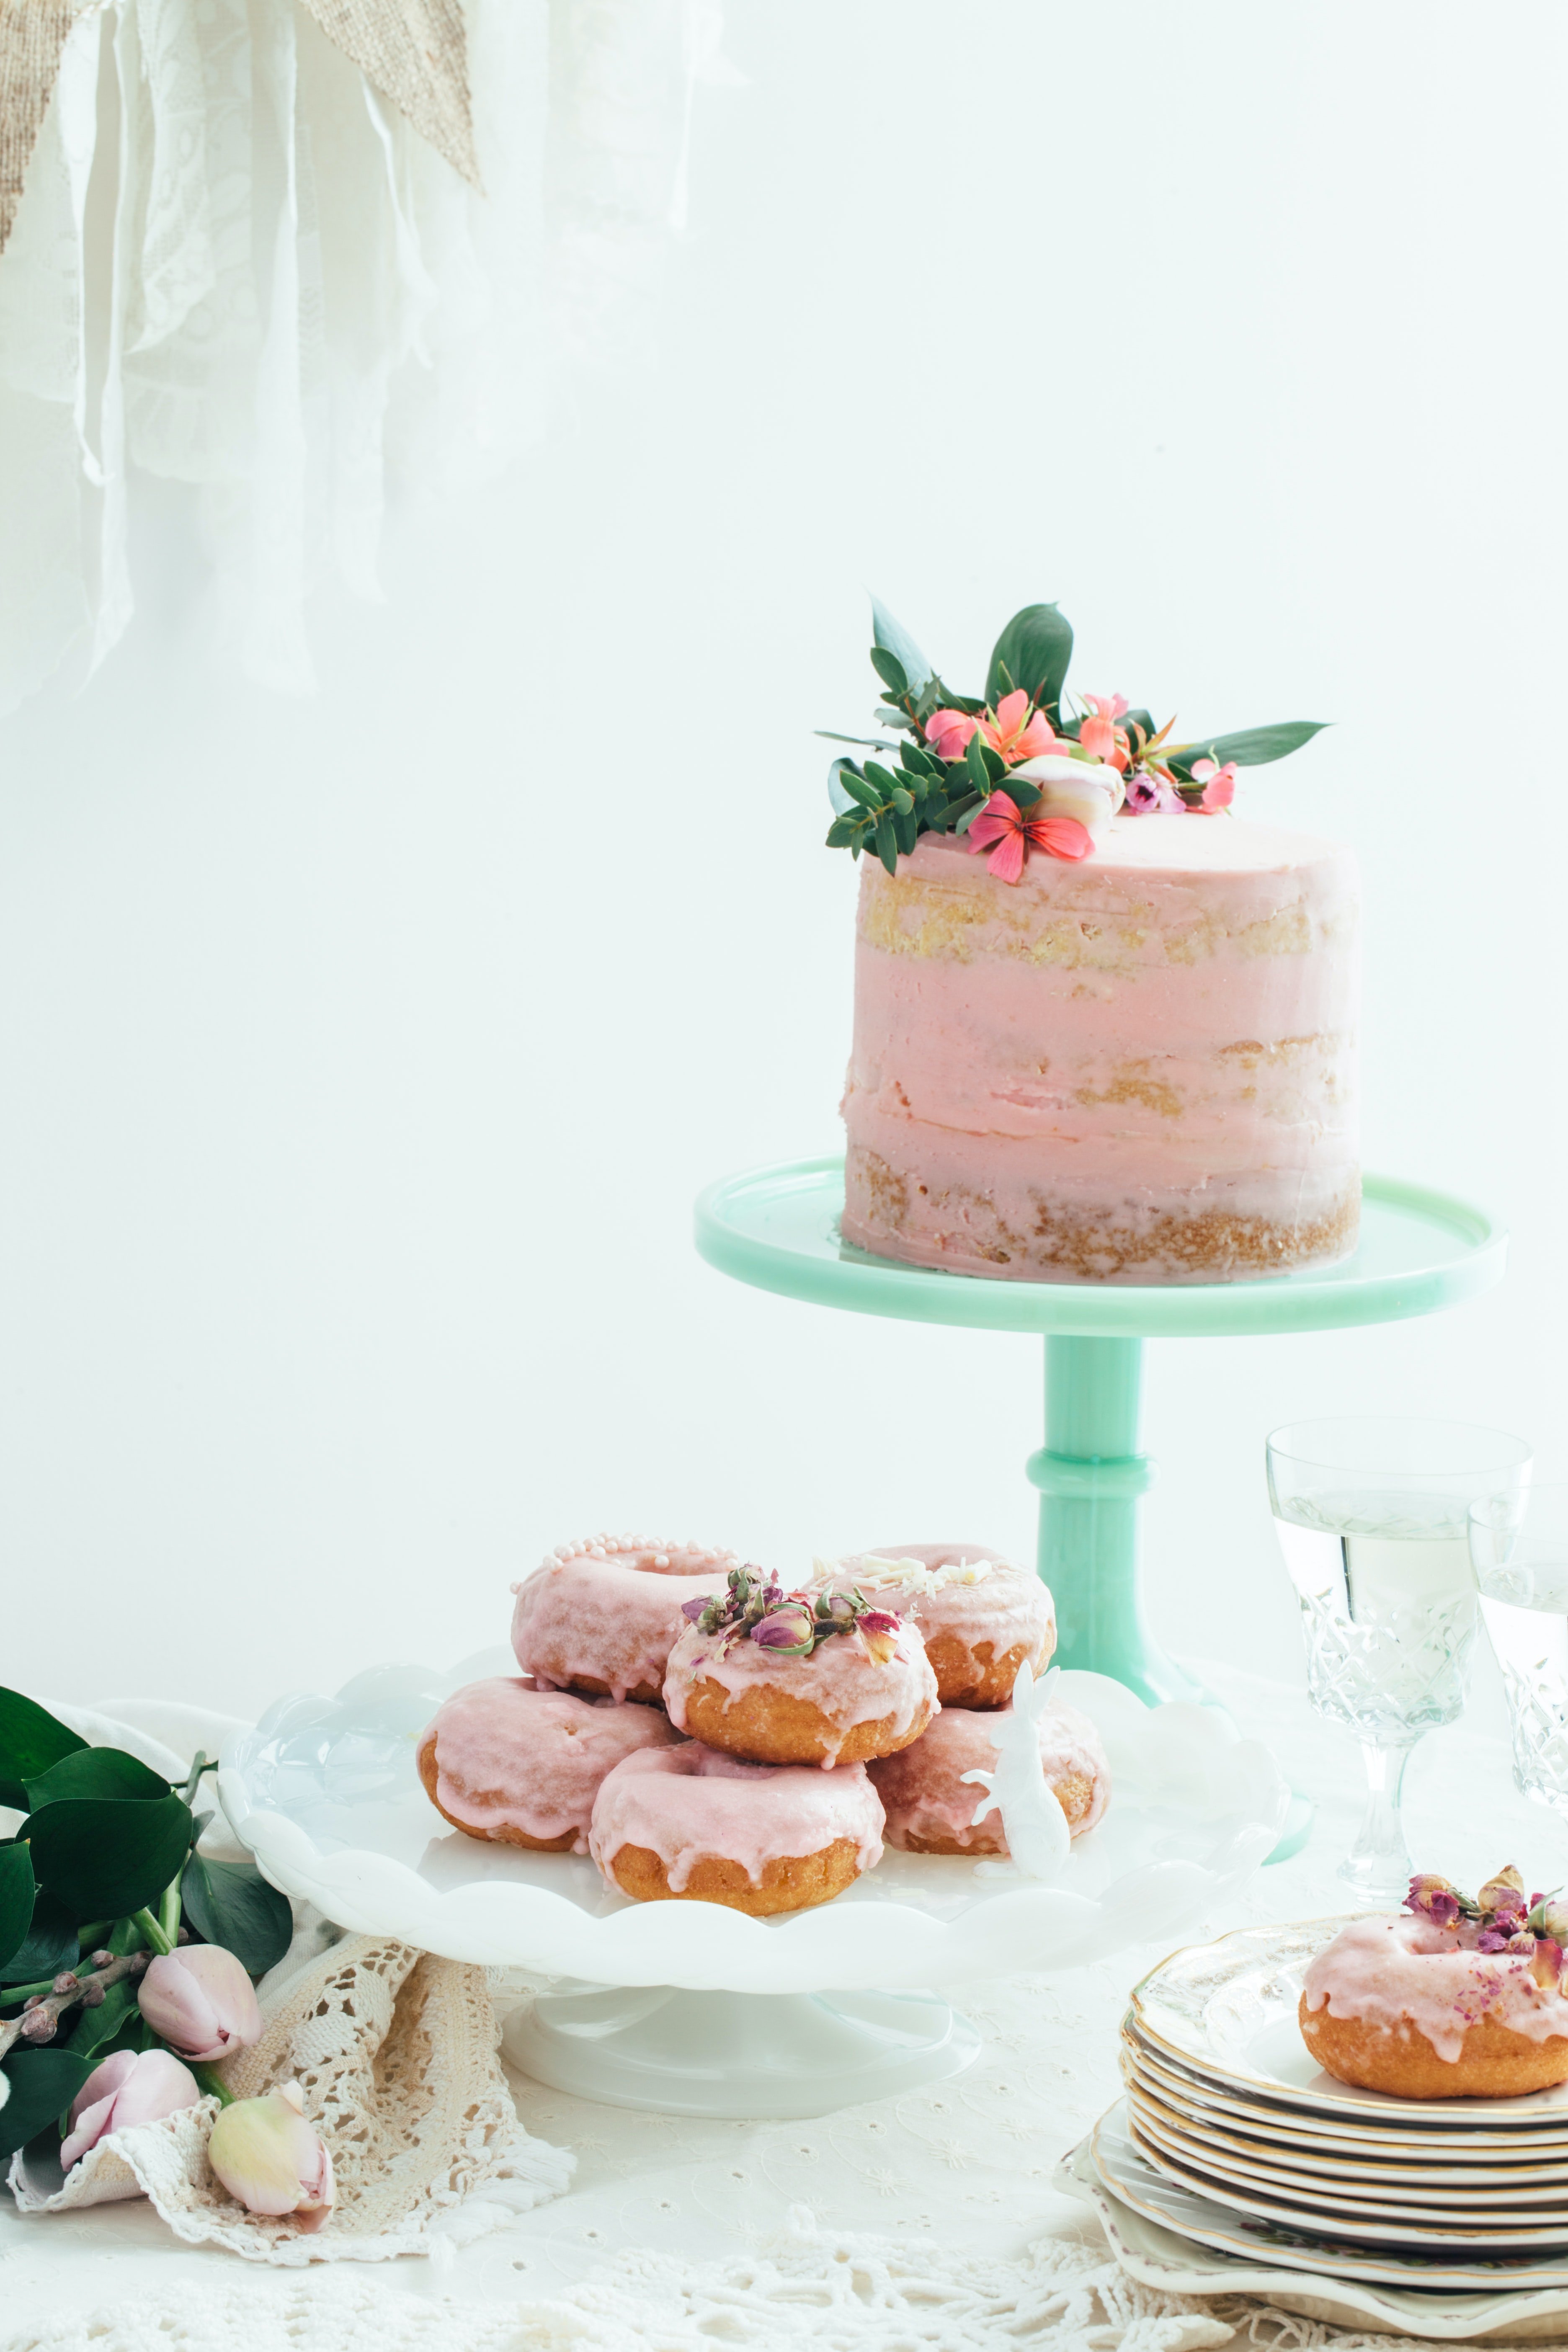 Nita had prepared a whole lot of treats for the birthday party. | Source: Unsplash